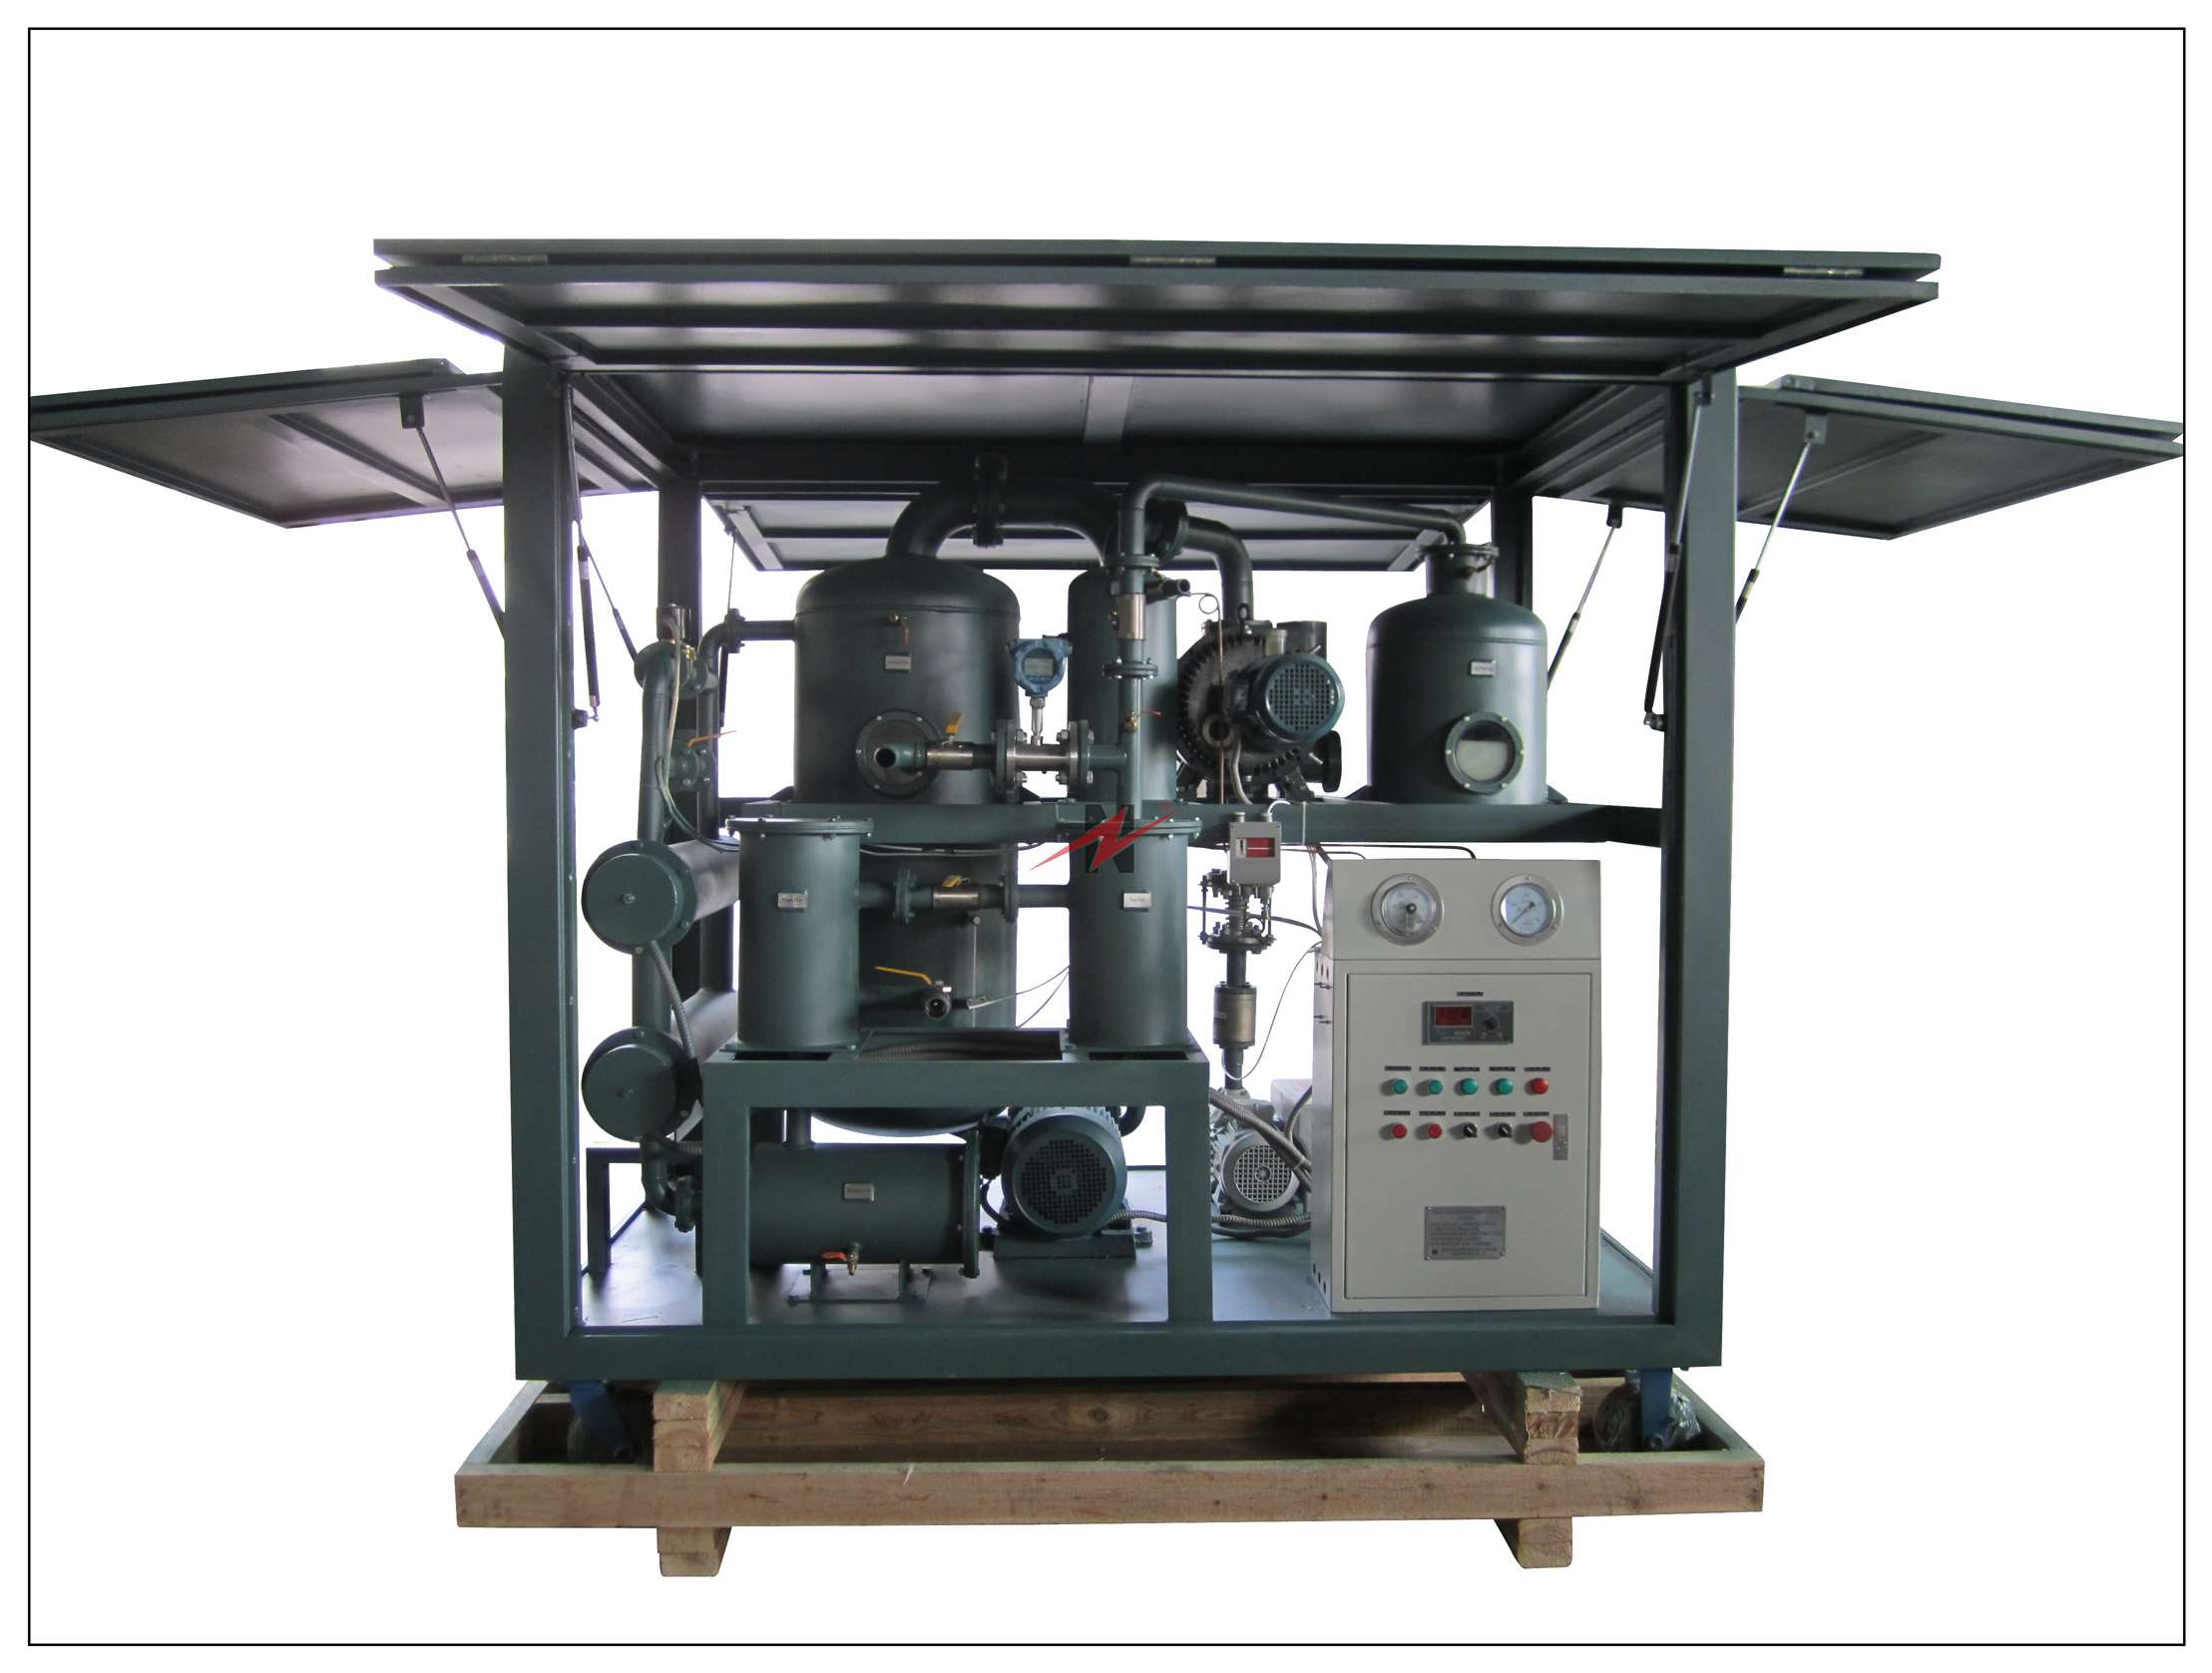  ZYD-I-W Enclosed Weather Proof Type Double Stage High Vacuum Transformer Oil Regeneration Purifier